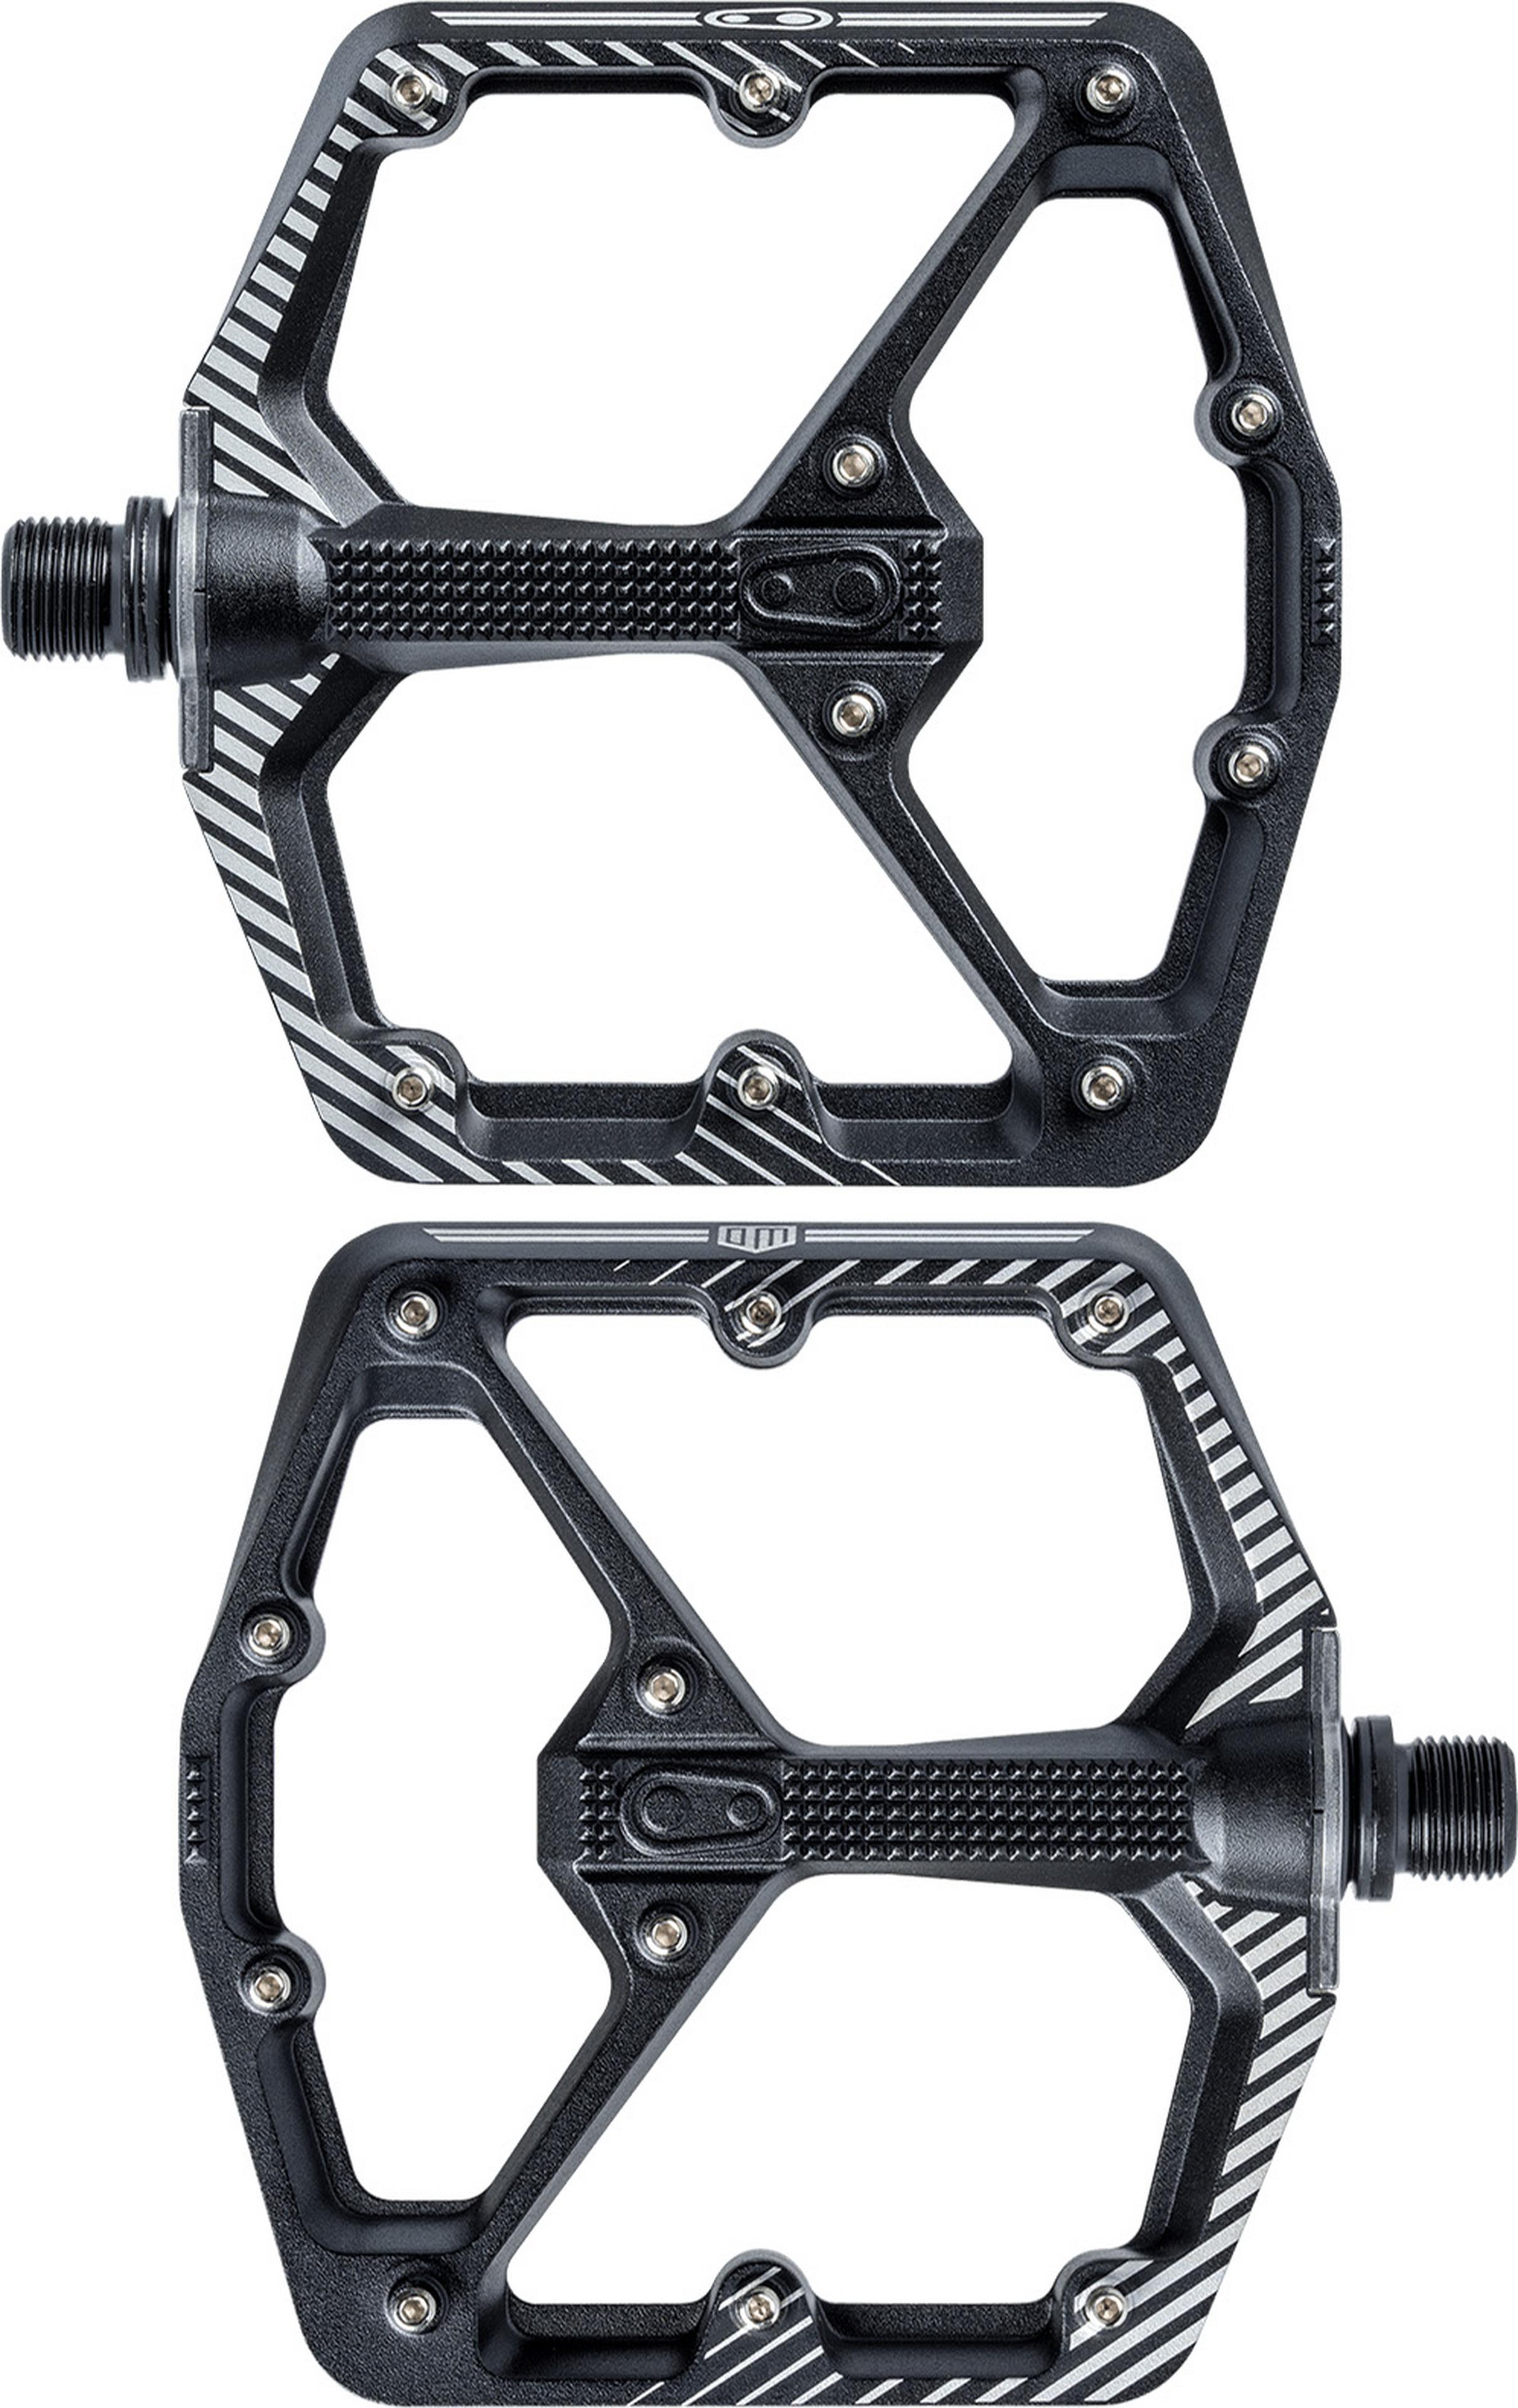 crankbrothers Stamp 7 Pedals Danny Mac Etd | Chain Reaction